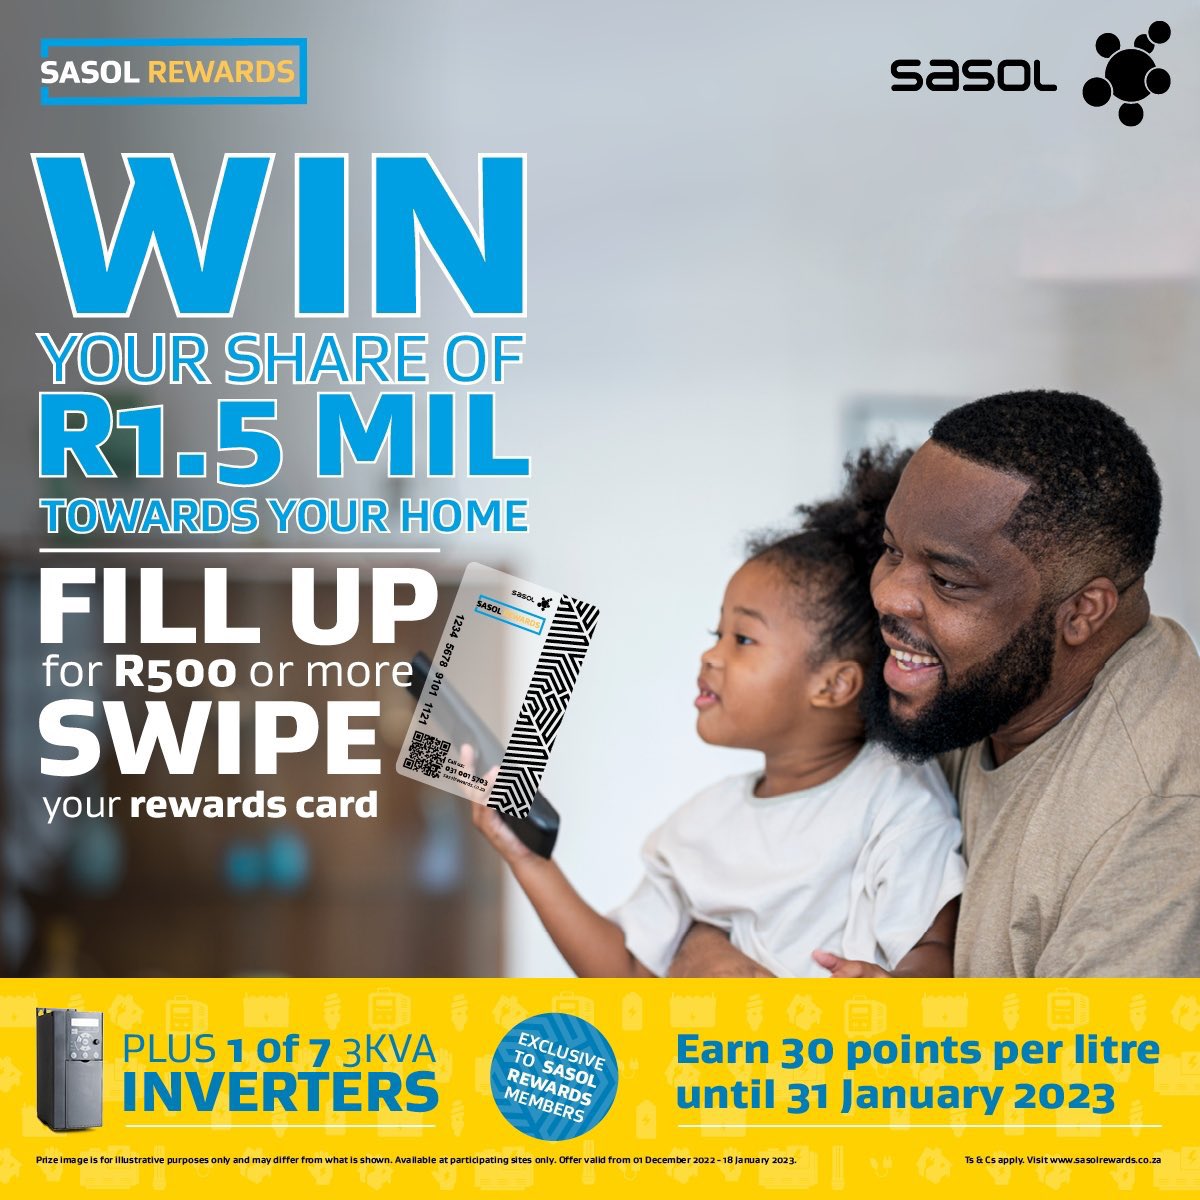 One can’t watch their favorite shows with loadshedding here 😩

But with #SasolRewards one can win themselves an inverter with this give away 😁

🔗: bit.ly/3hOrj2f